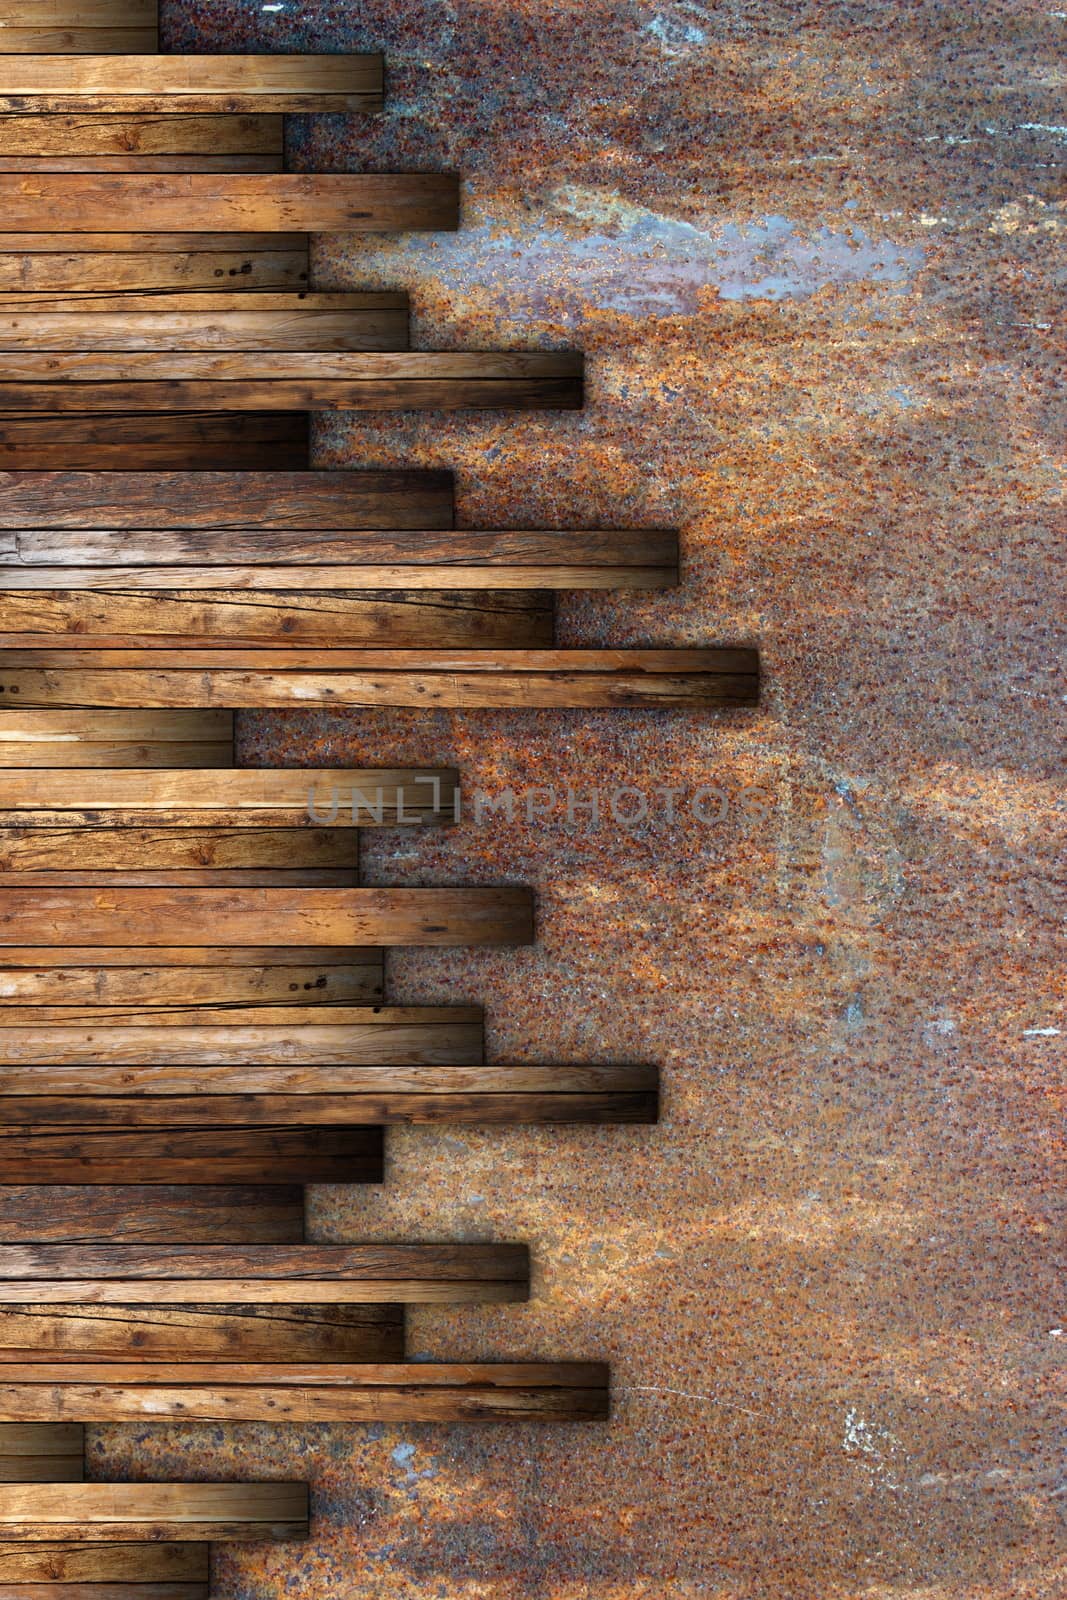 textured wooden boards montage forming floor design on grunge surface